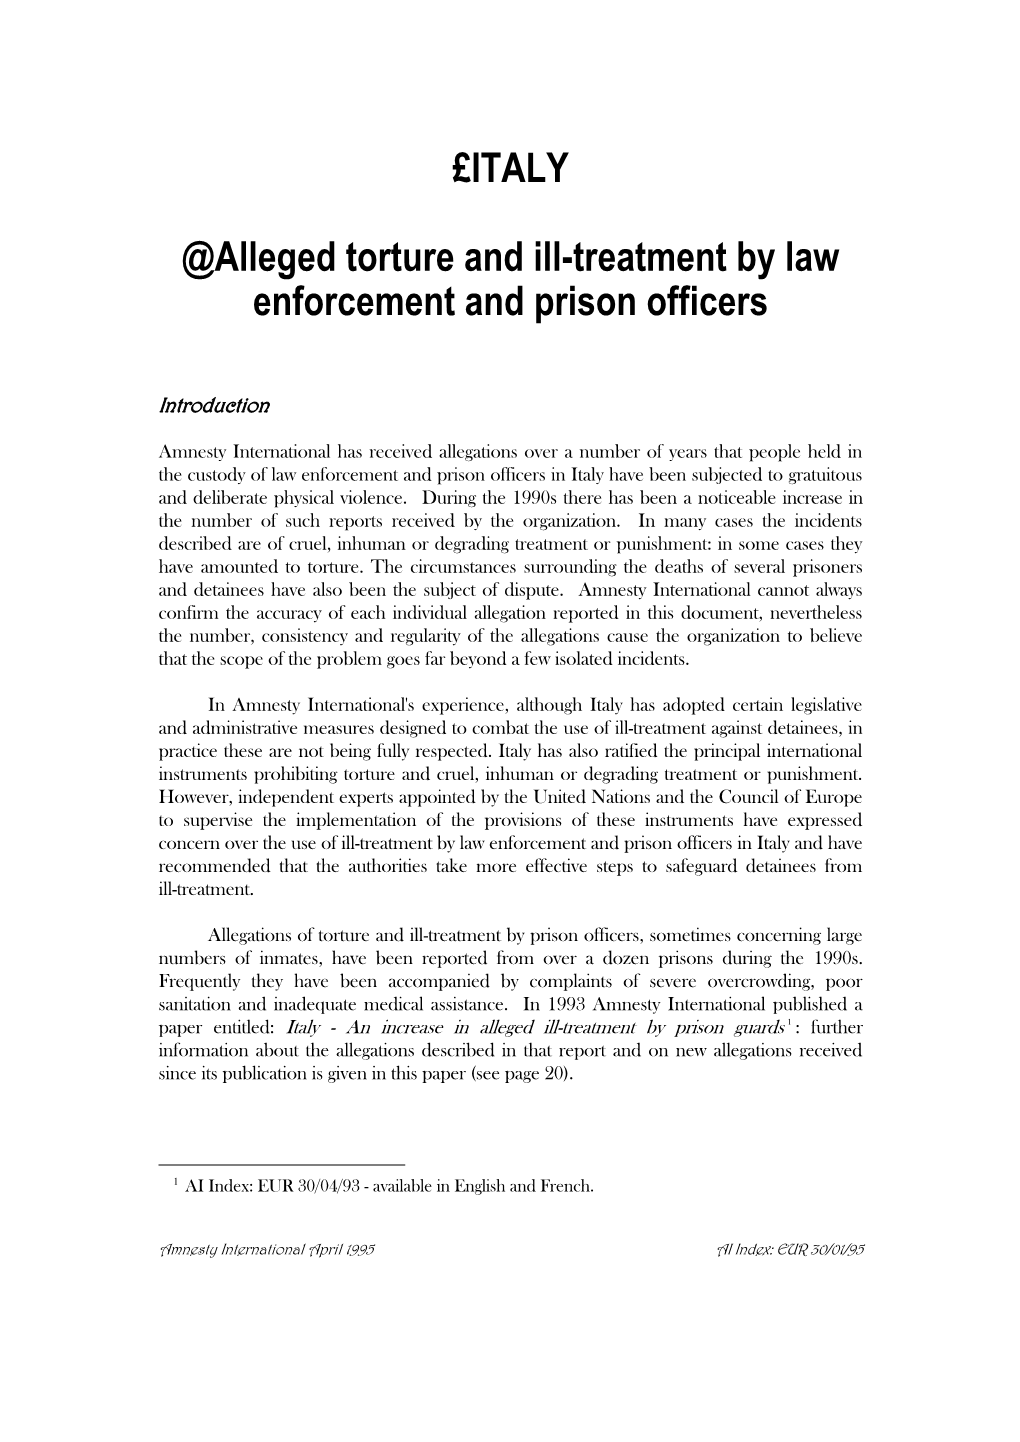 £ITALY @Alleged Torture and Ill-Treatment by Law Enforcement